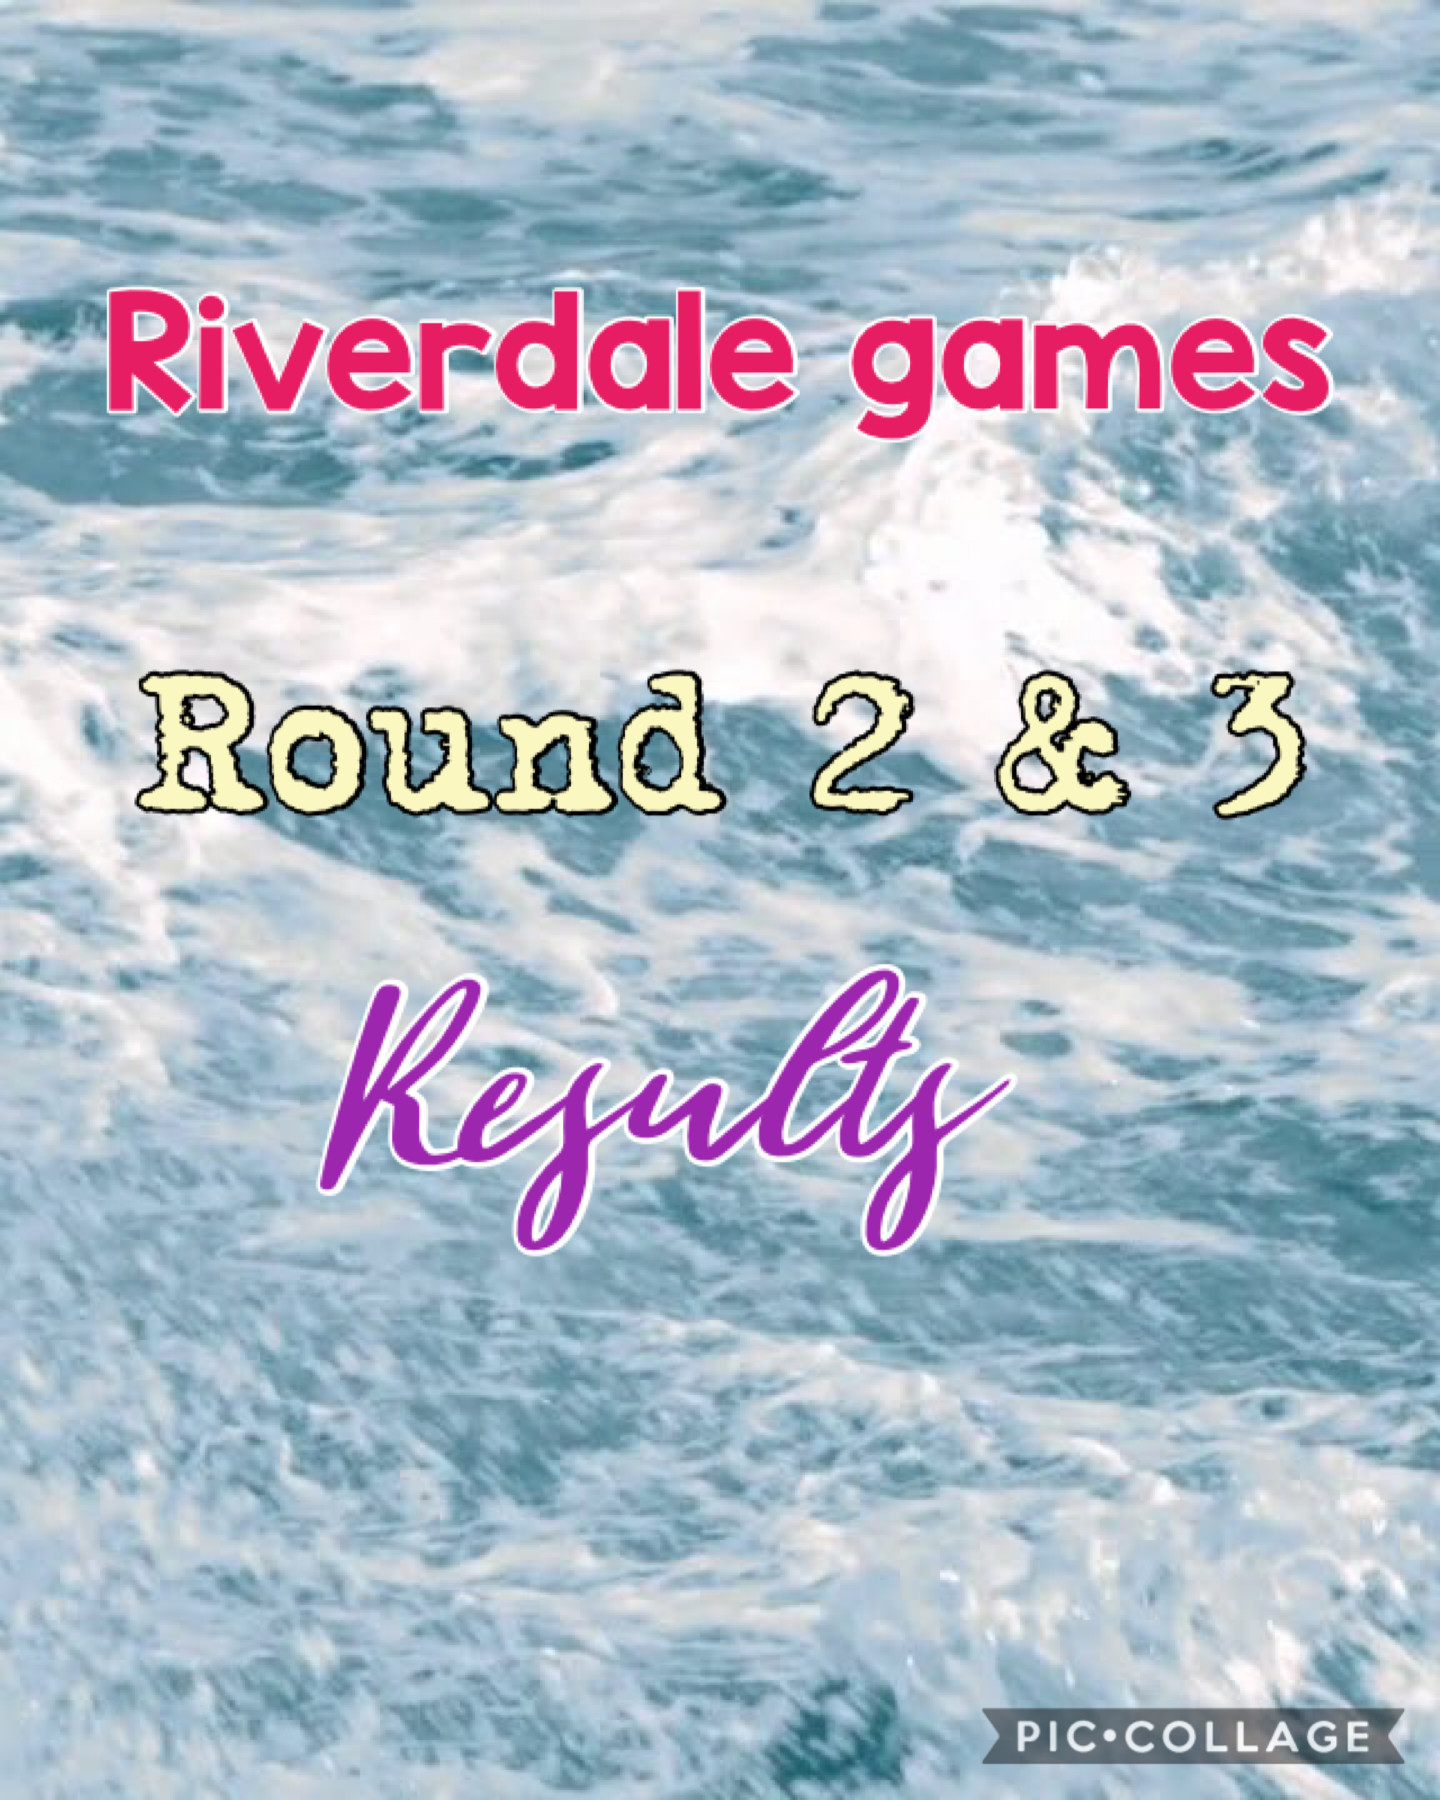 Riverdale games results for round 2&3